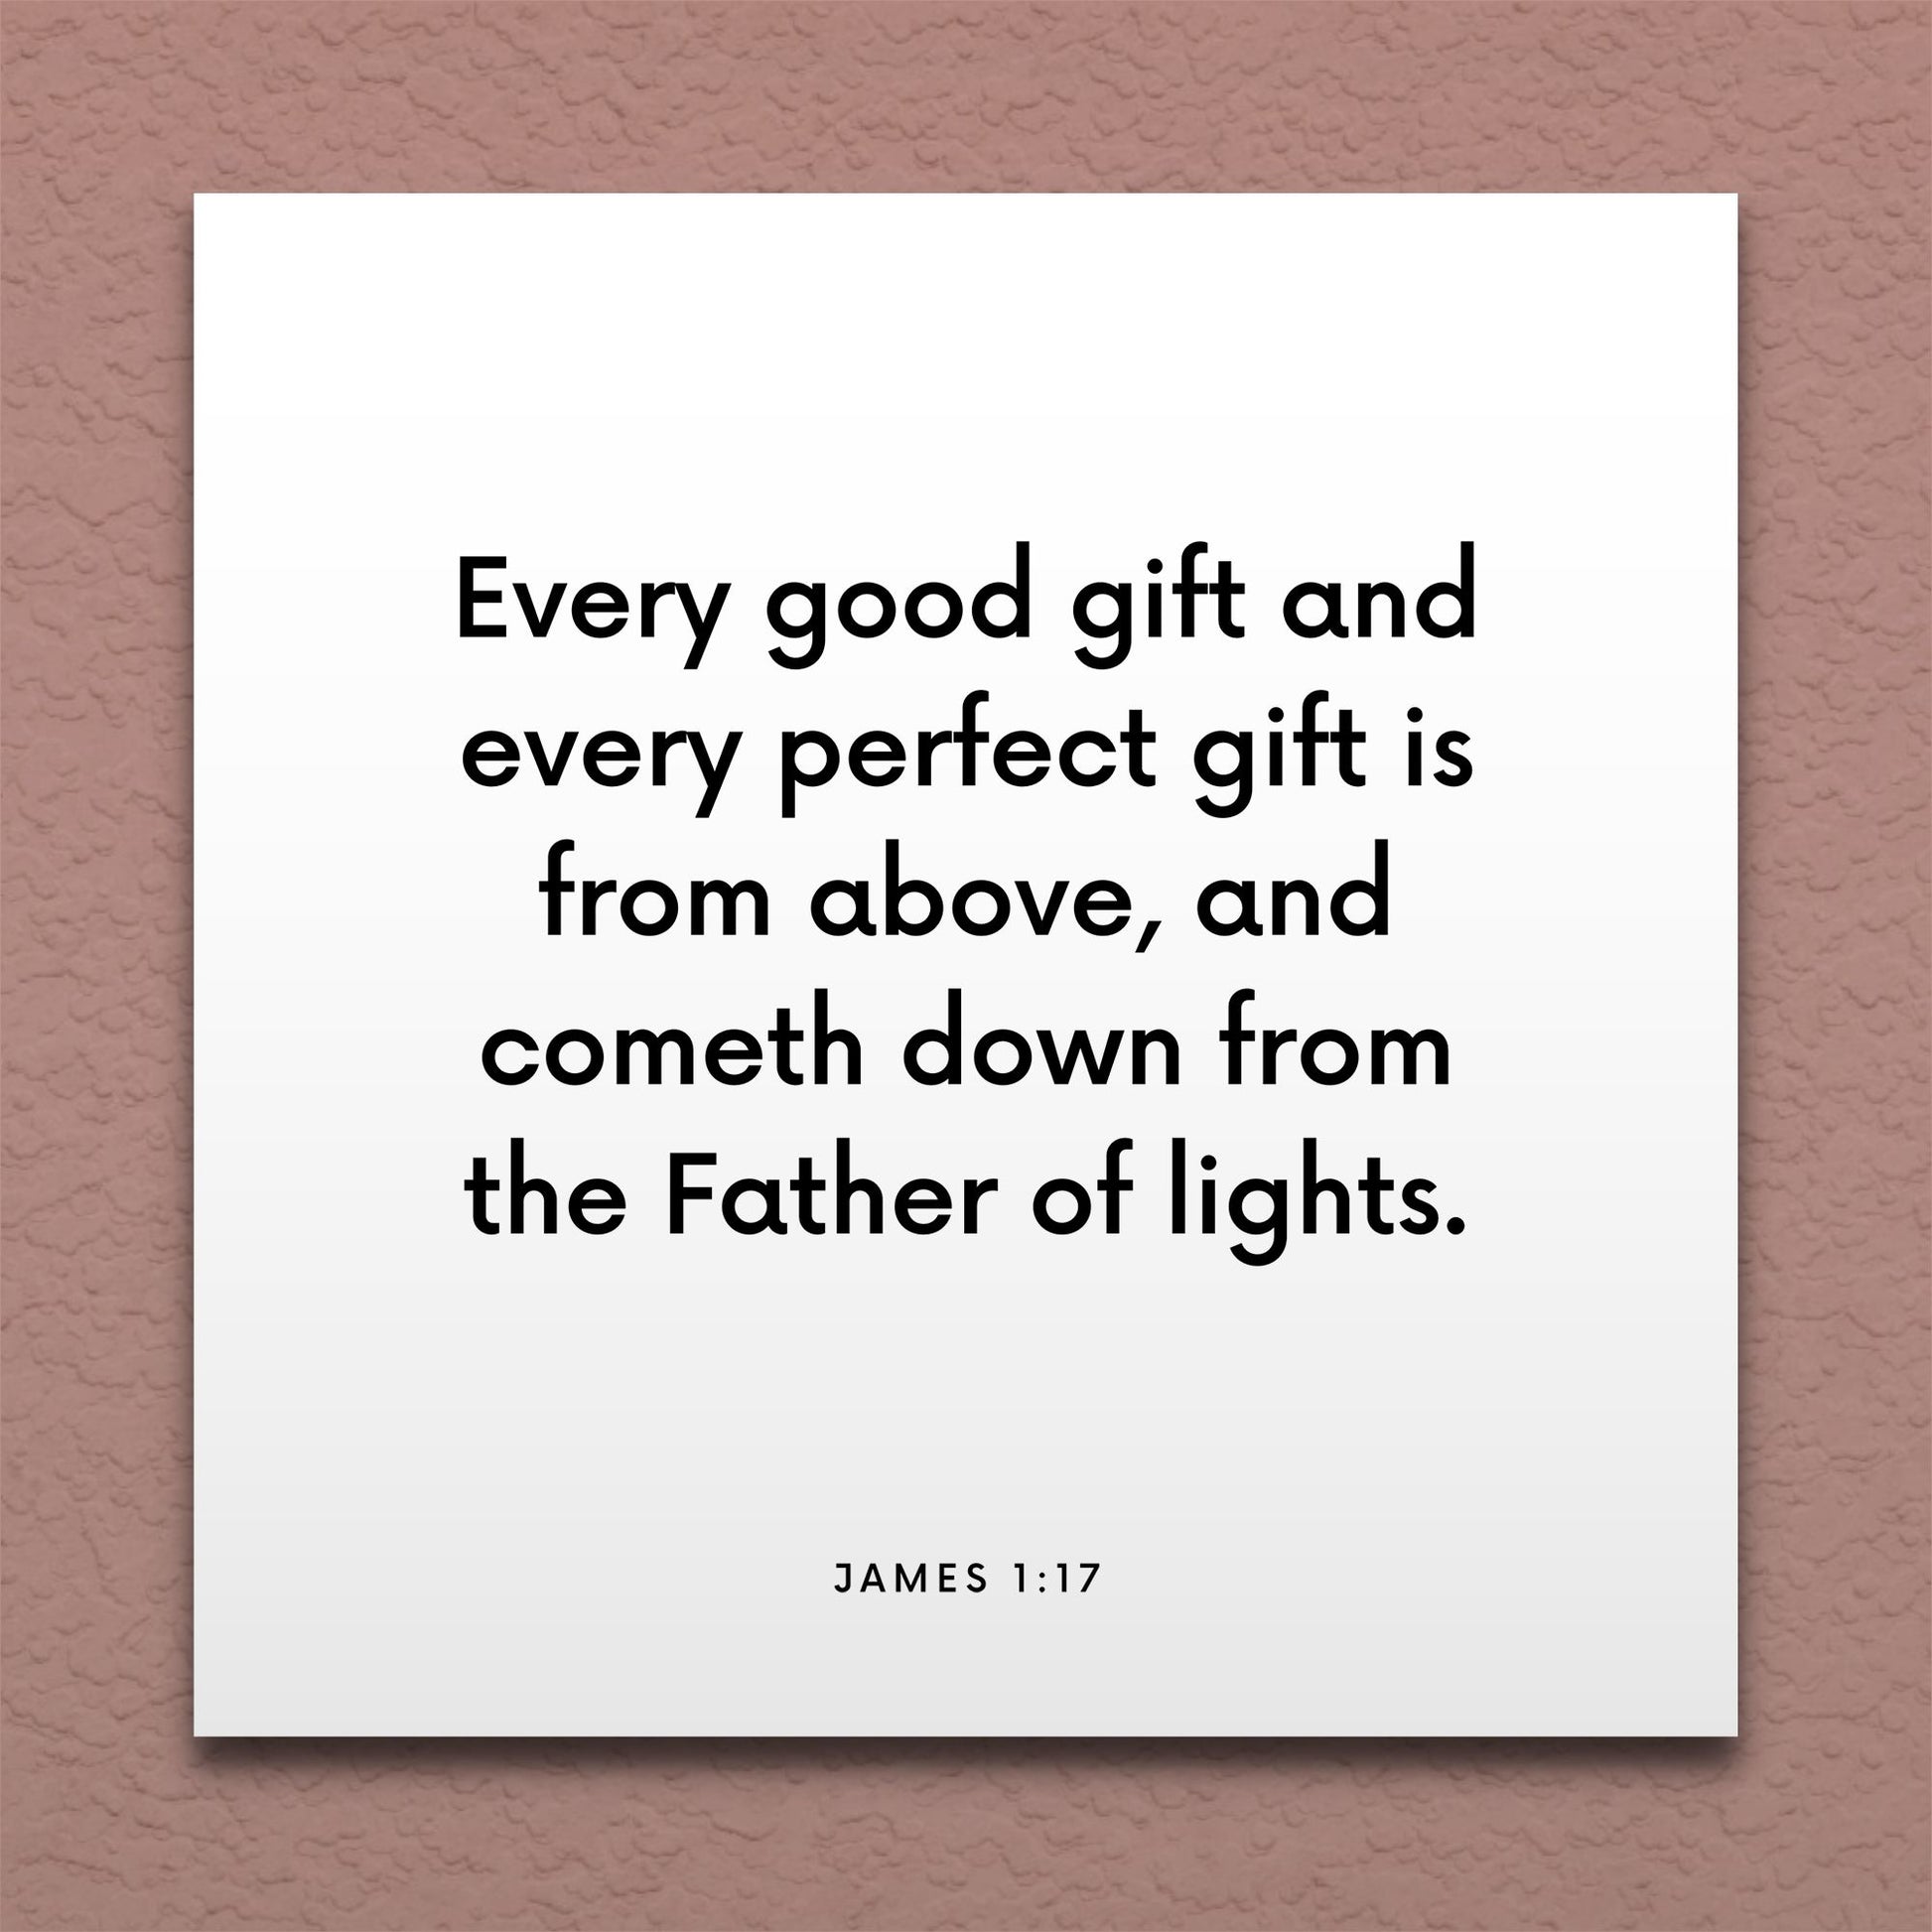 Wall-mounted scripture tile for James 1:17 - "Every good gift and every perfect gift is from above"